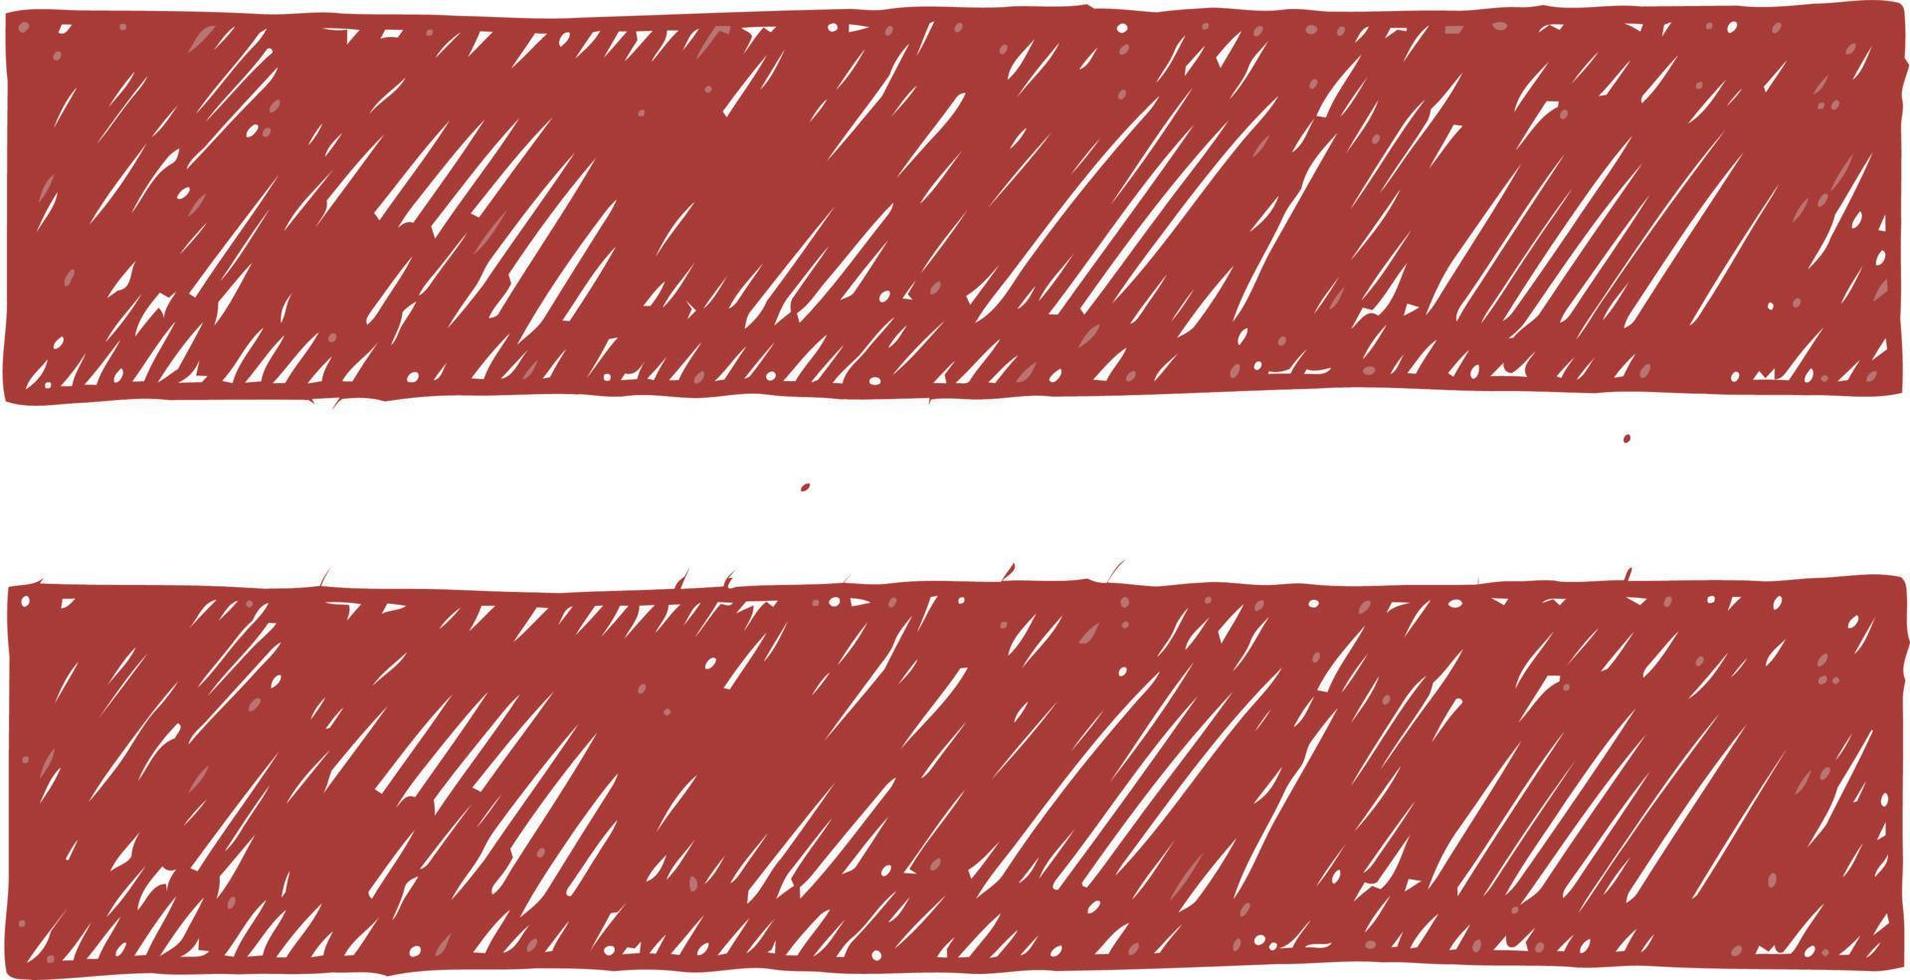 Country Flag Pencil or Marker Sketch Vector